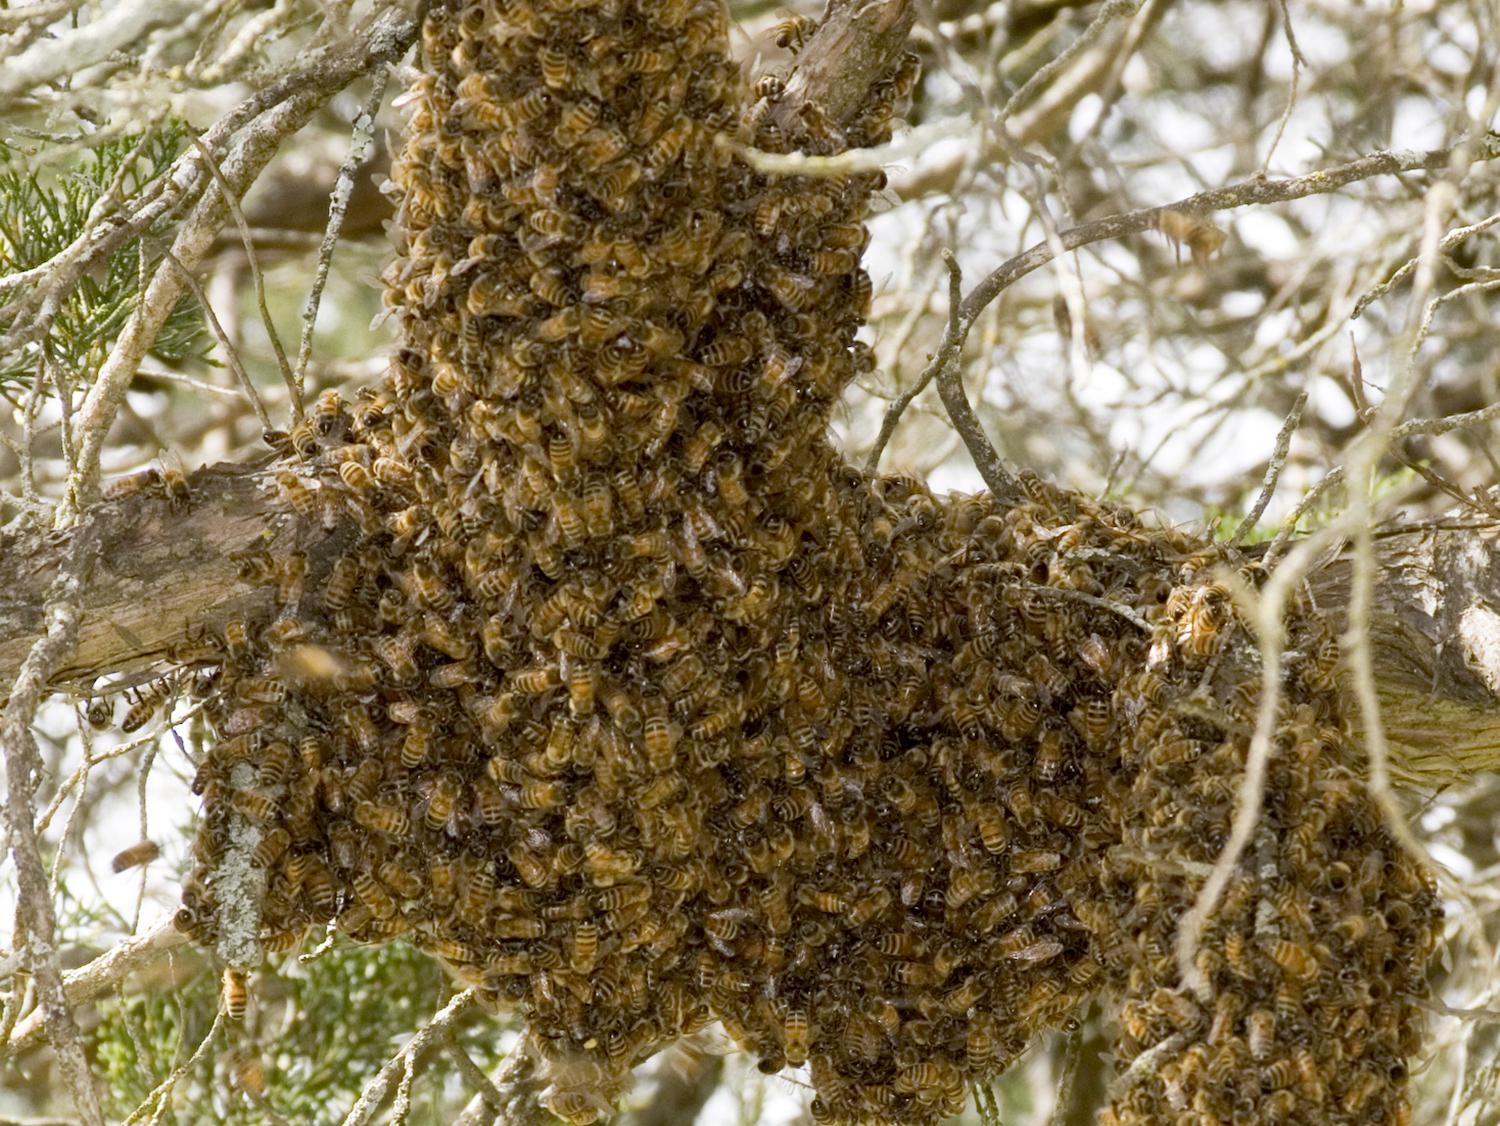 As bee swarms land on branches and other objects this spring, do not disturb them. The honeybees are seeking a new home and will usually move on within a few days. (MSU Extension Service file photo)